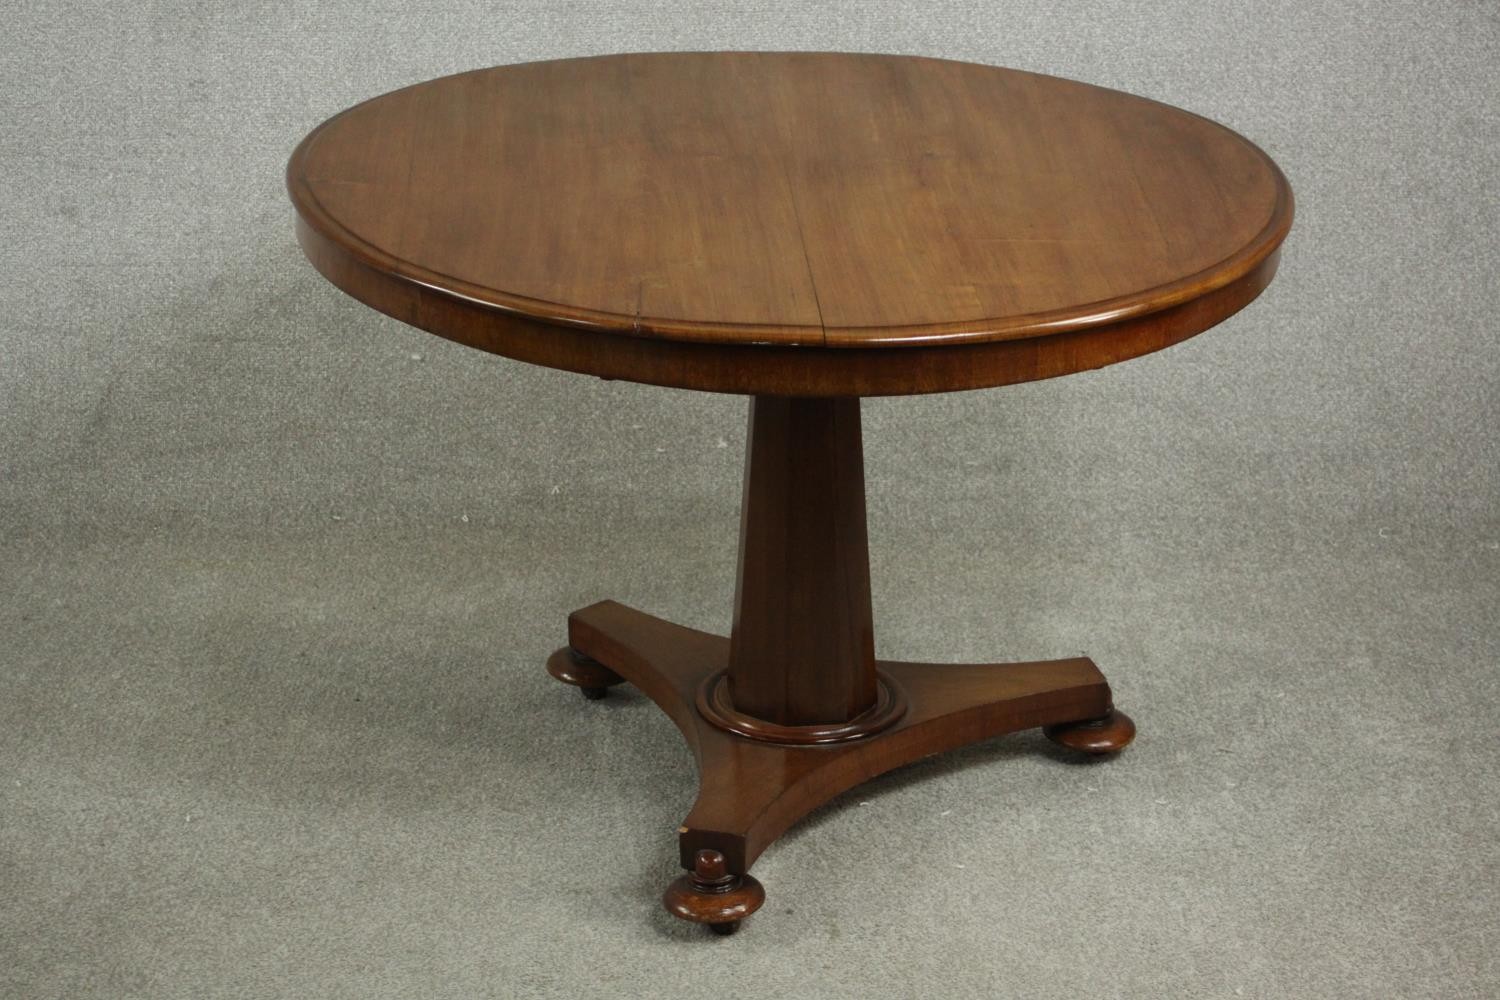 A mid 19th century walnut tilt top table, the circular top with a moulded edge, on a chamfered